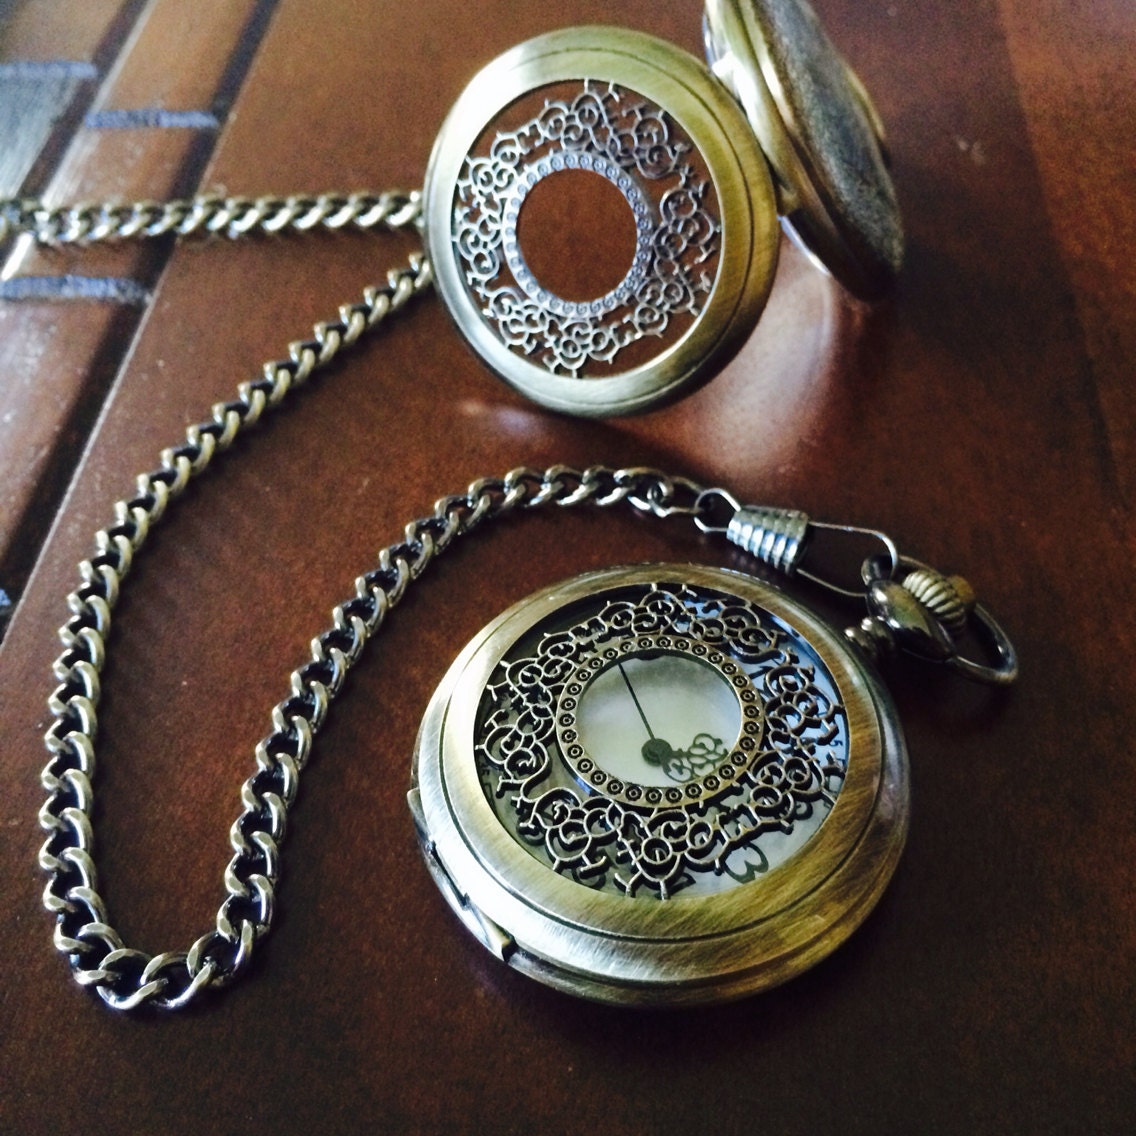 Set of 4 Steampunk Pocket Watch with chains Steampunk Best Groomsmen gifts Ships from Canada